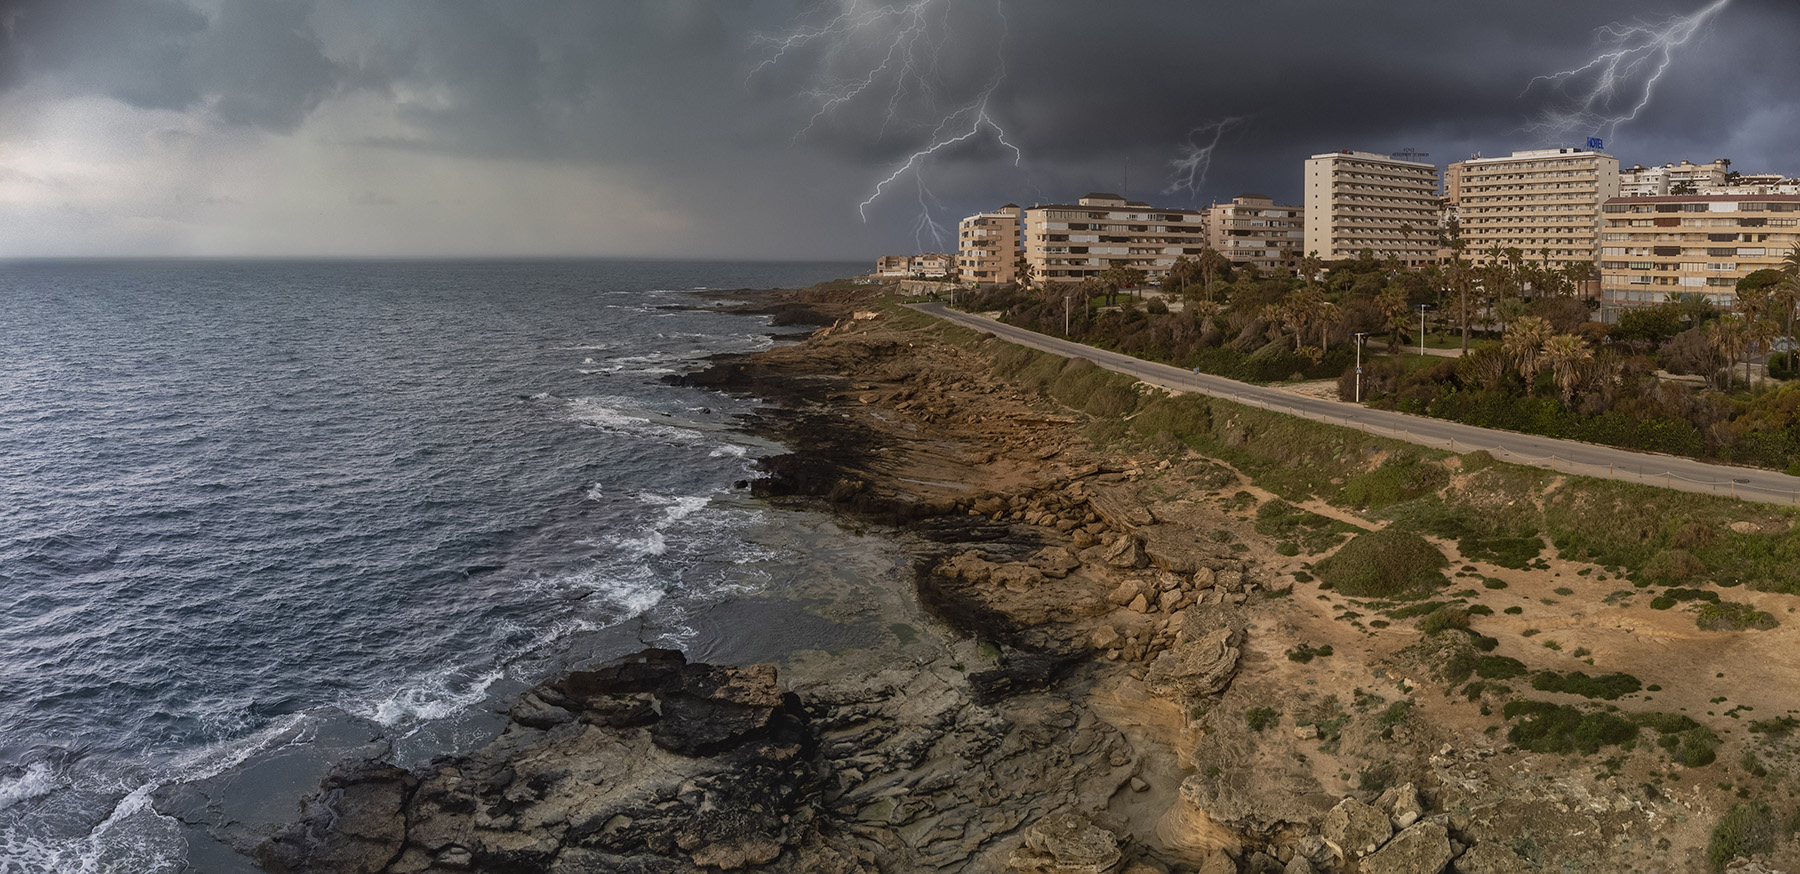 Ocean on the left, highway and buildings on the right depicting a coastal community. There is lightning in the background.